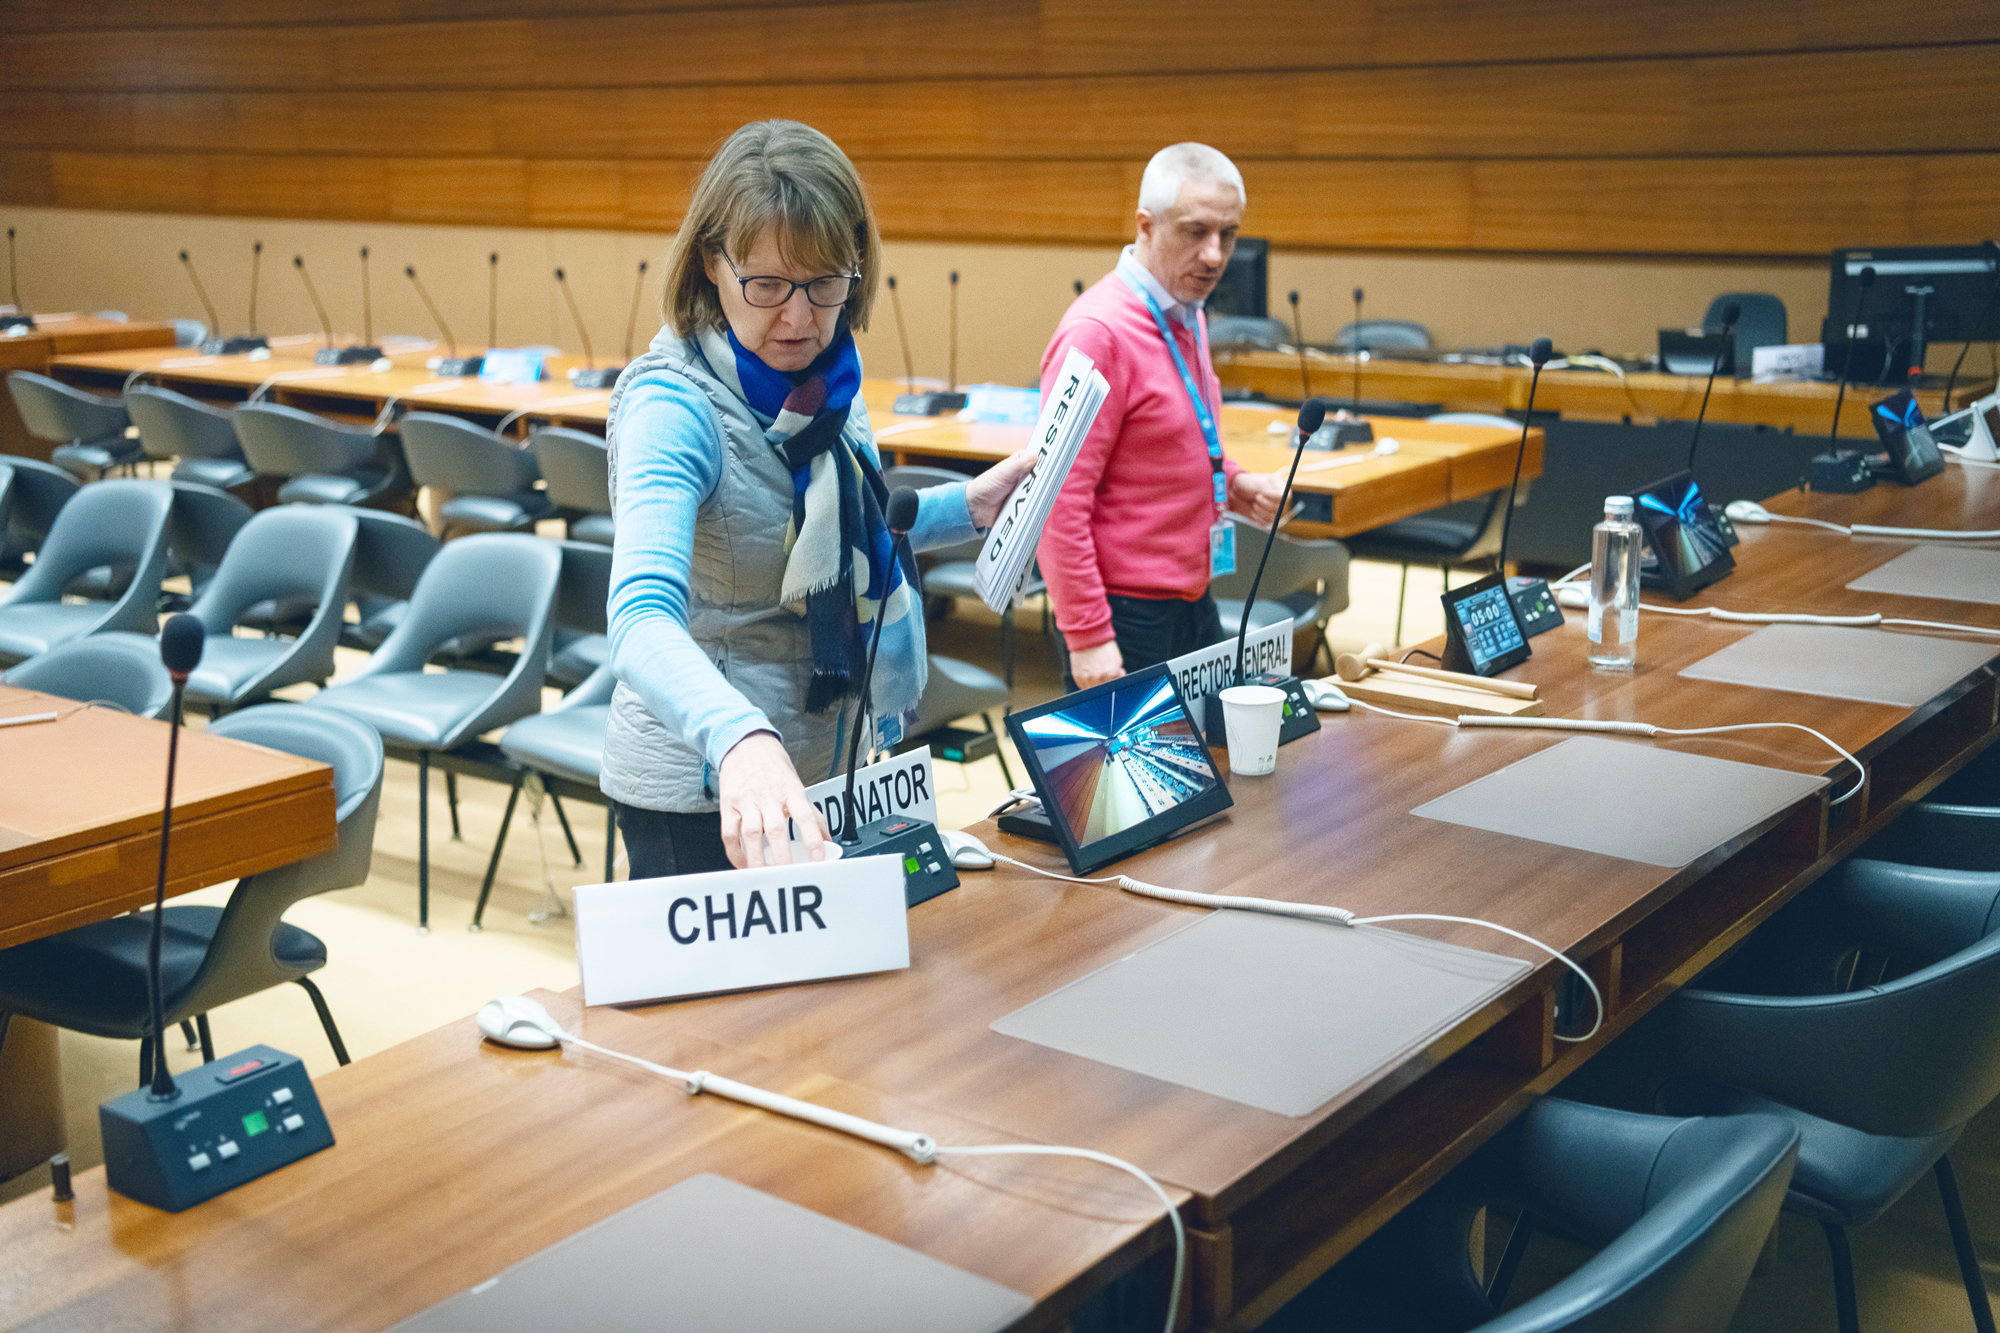 A woman places a nameplate saying “chair” on a wooden table in a conference room near a nameplate that says “coordinator”. In her other hand is another nameplate that says “reserved”. A man stands near her. In the background there are two long wooden tables with microphones and rows of chairs. 